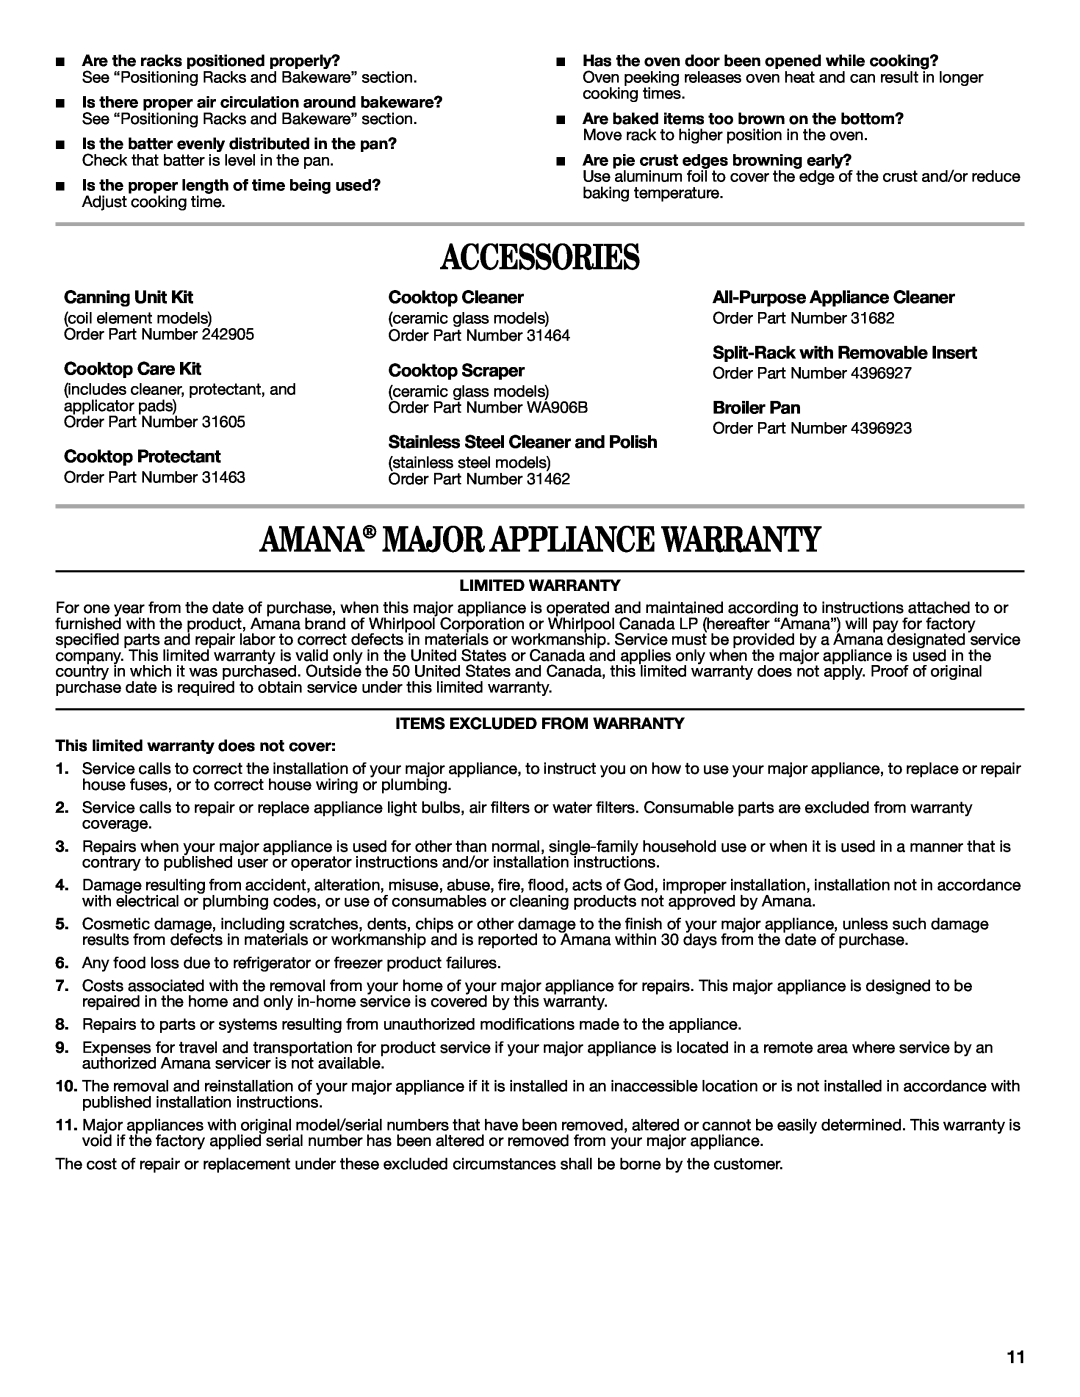 Amana AER5522VAW warranty Accessories, Amana Major Appliance Warranty, Canning Unit Kit, Cooktop Cleaner, Cooktop Care Kit 